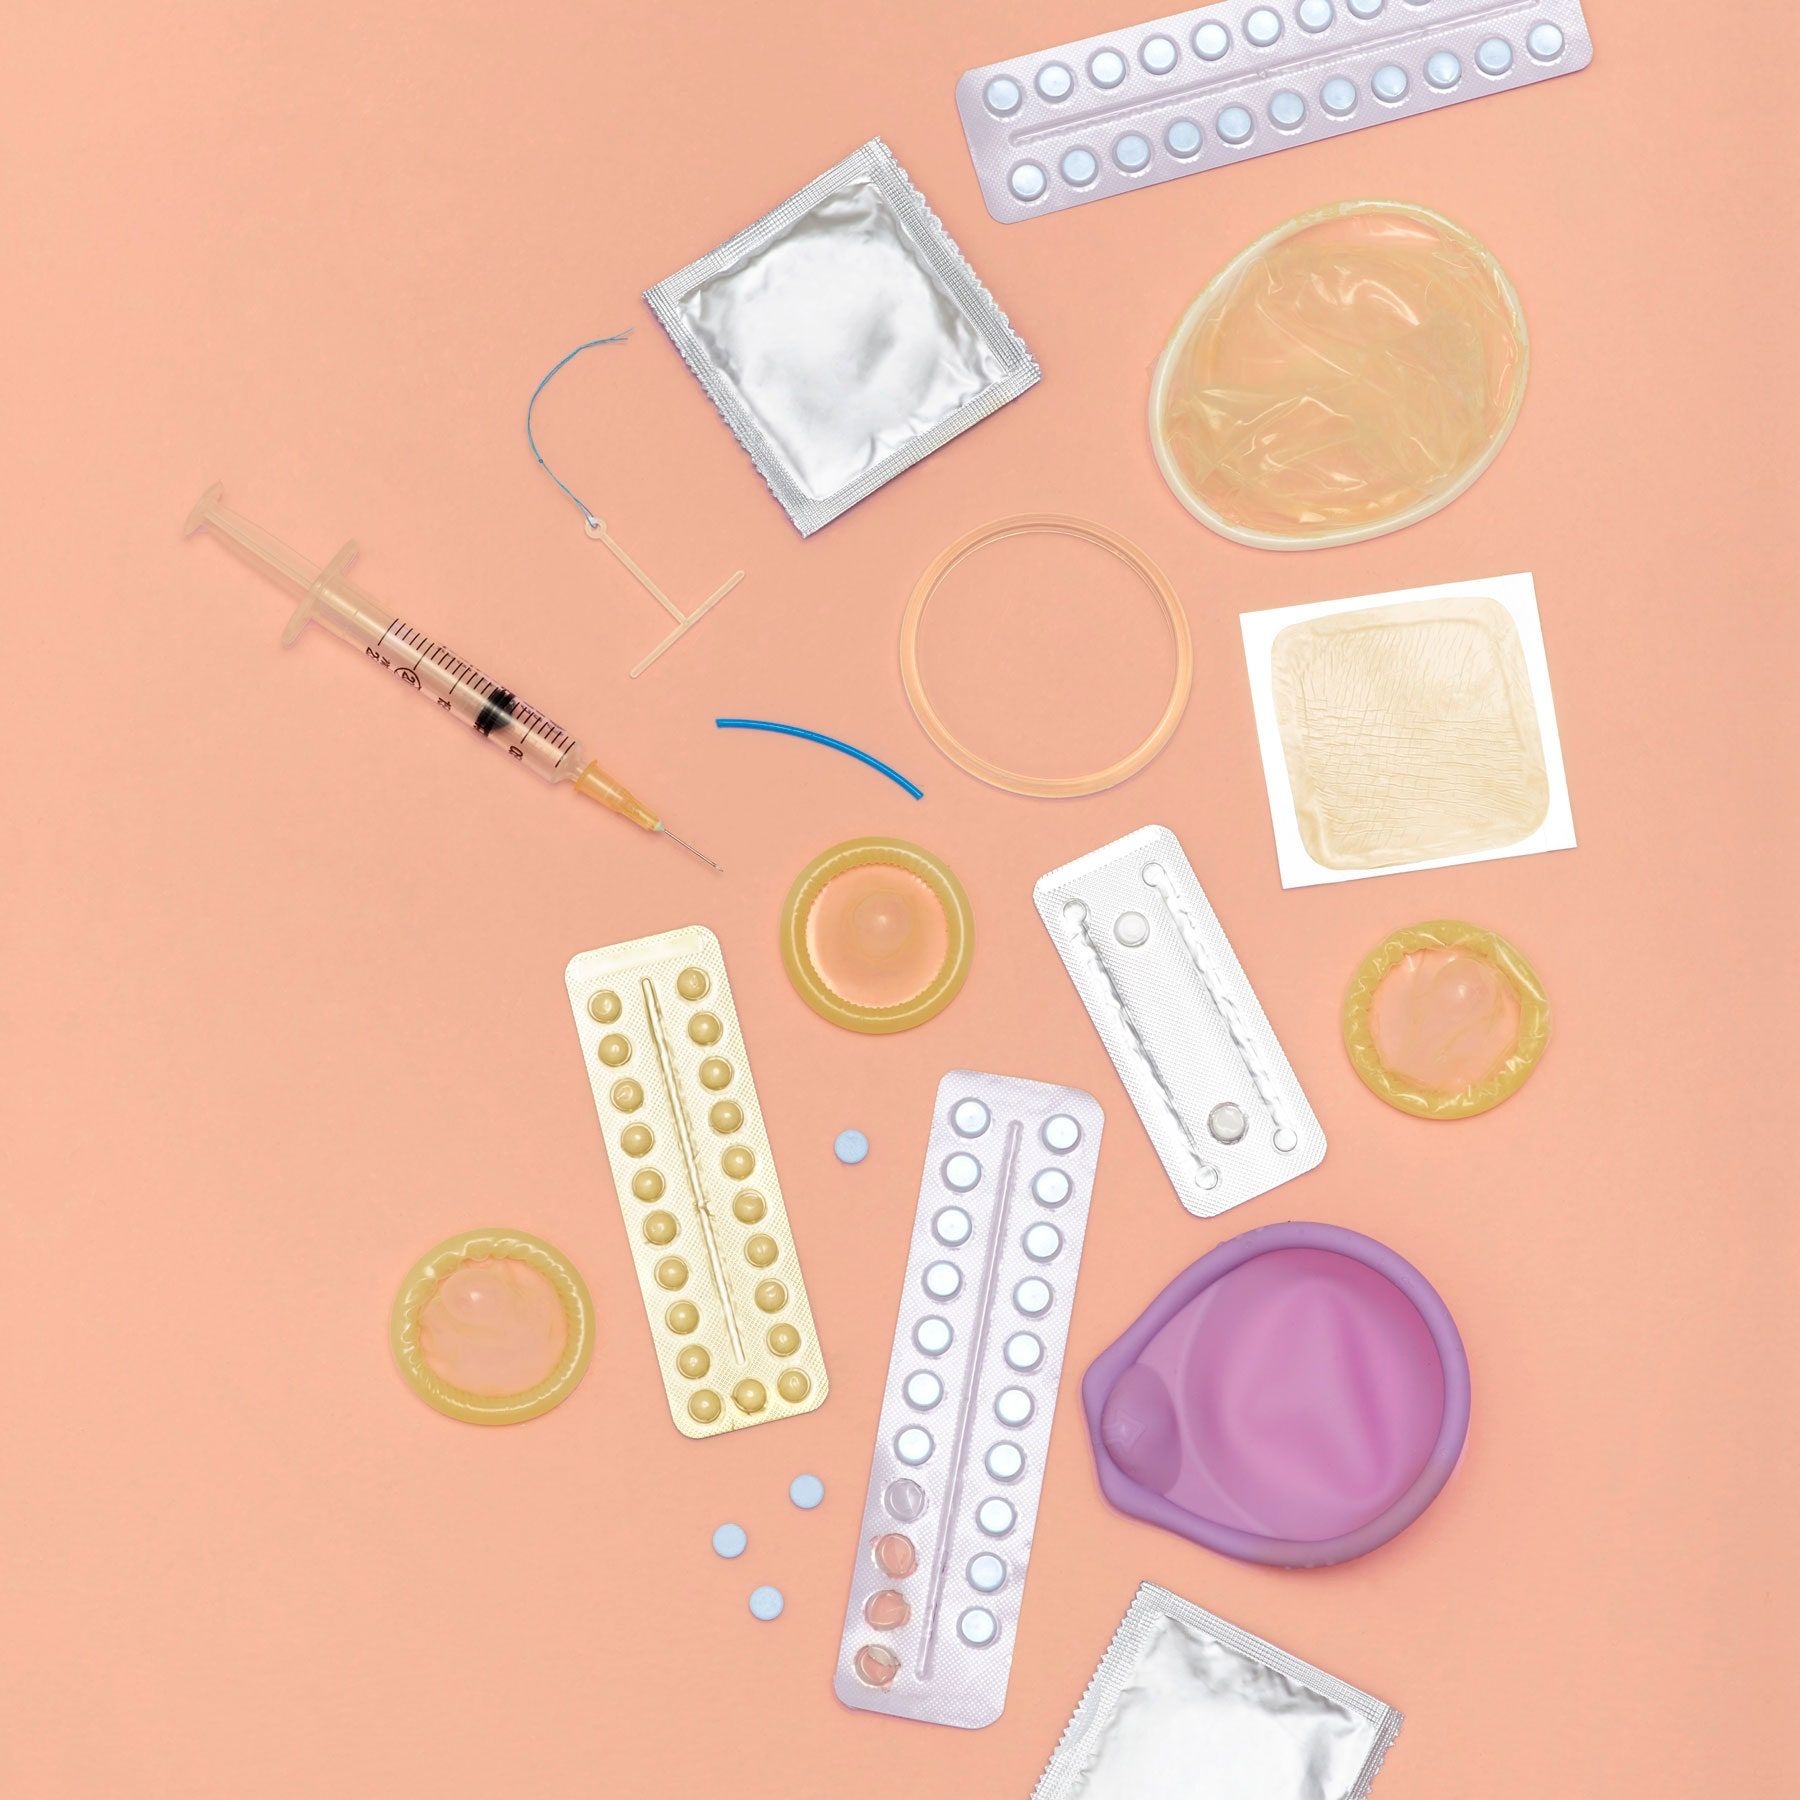 20 Birth Control Side Effects Every Woman Should Know | Glamour